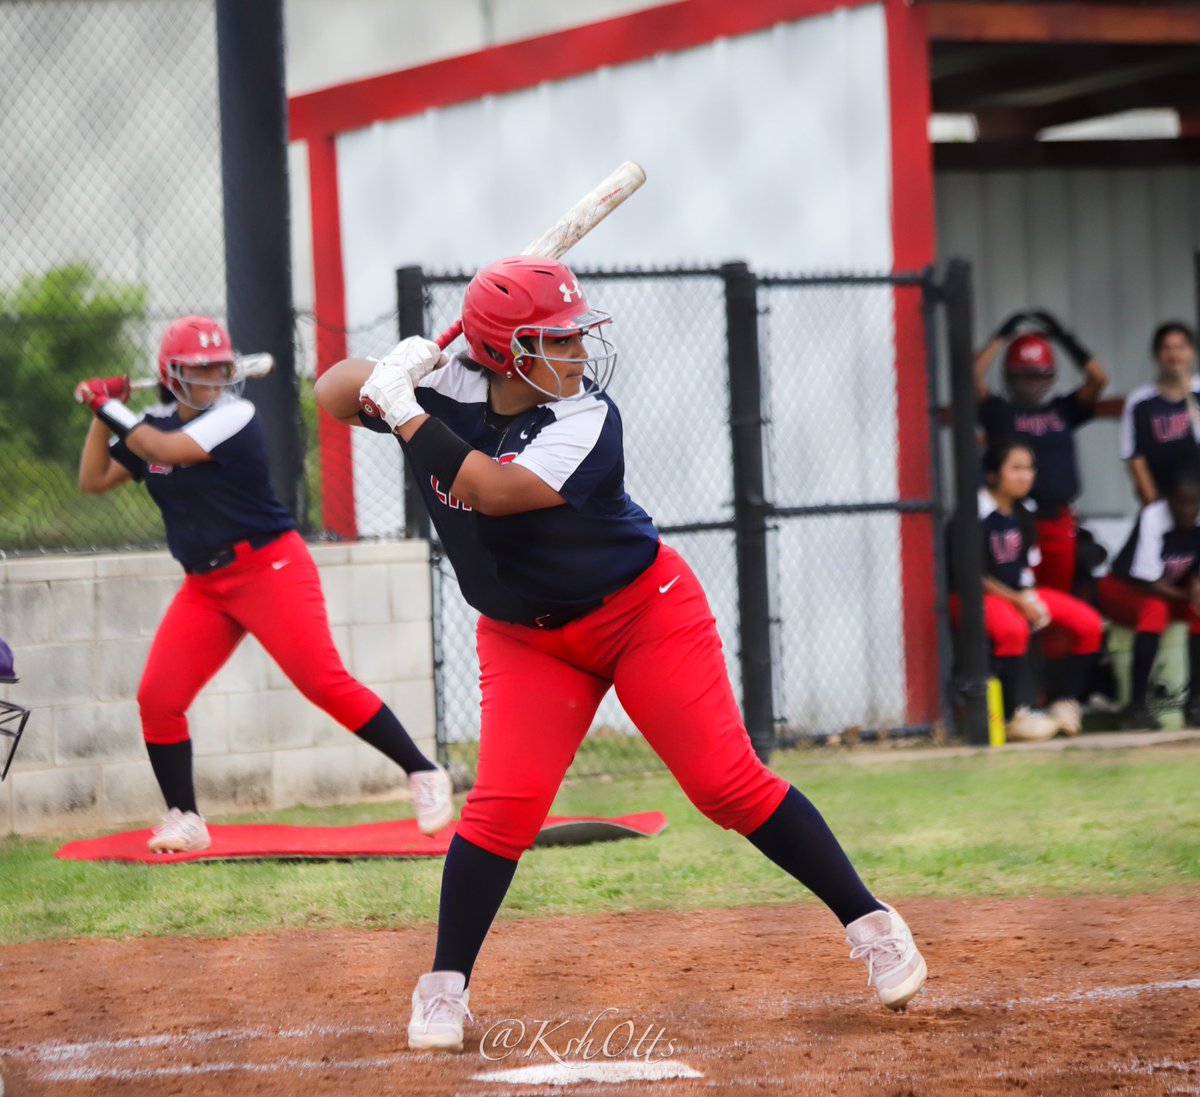 Huge shout out to @NevaehEspa8726  for making the RBI roster to play in Washington at the @JennieFinch Classic this summer. 
Proud of all your hard work and dedication to improvement